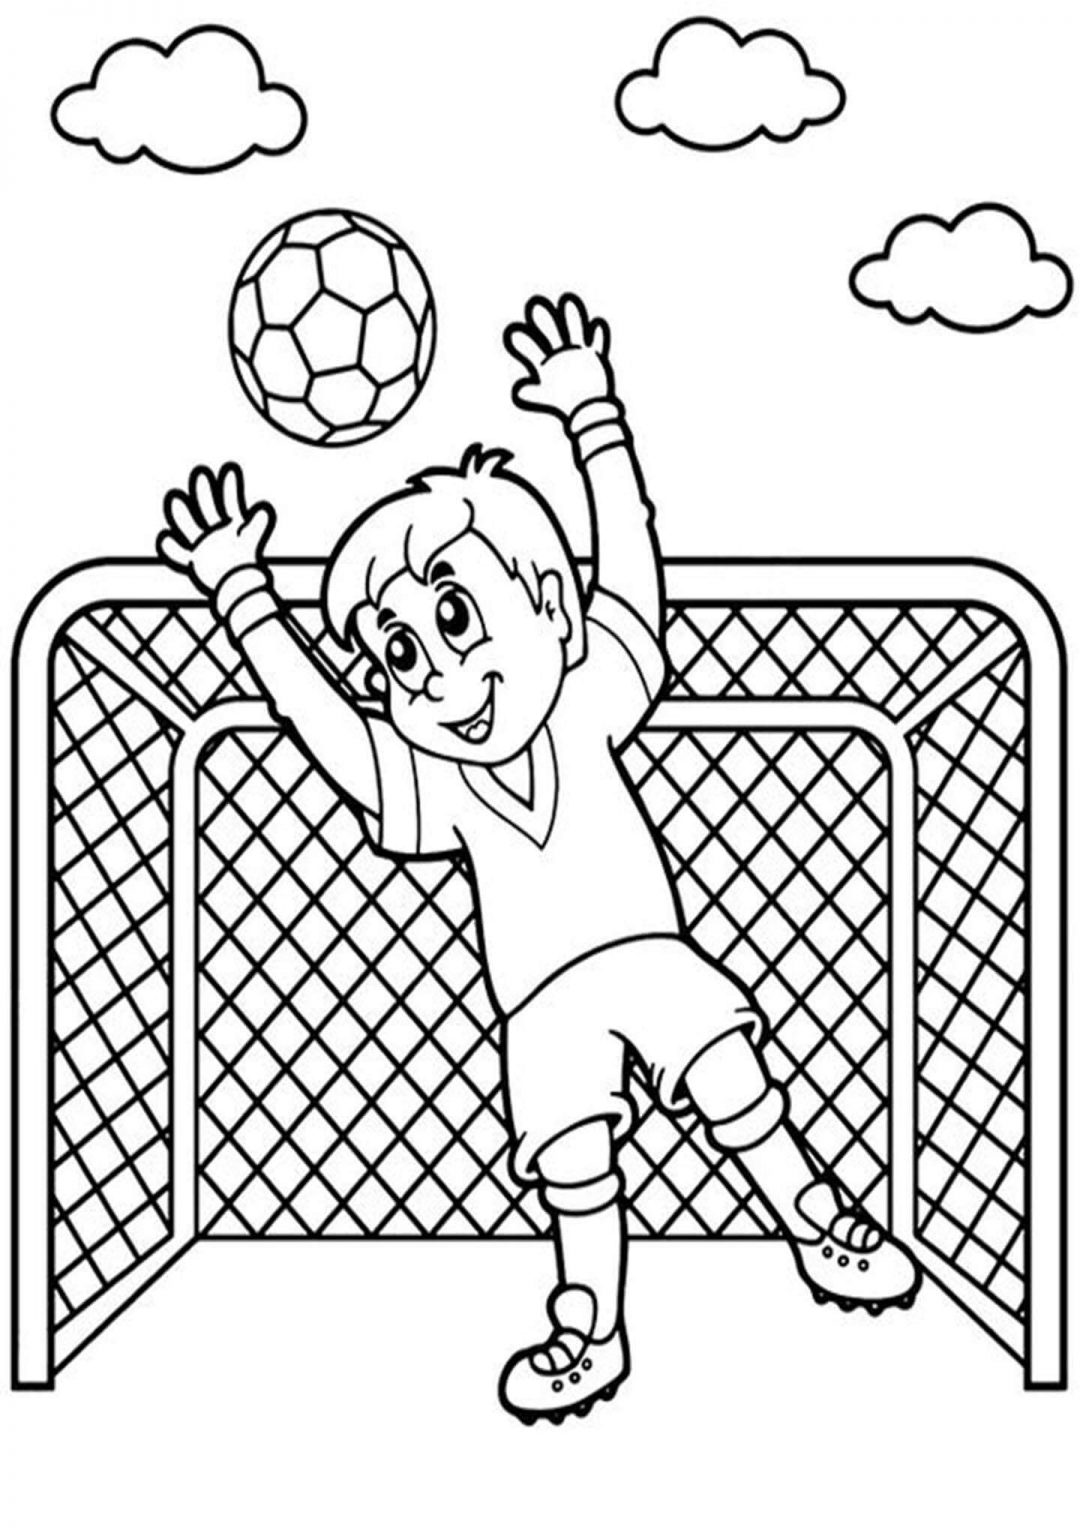 Free & Easy To Print Soccer Coloring Pages Tulamama